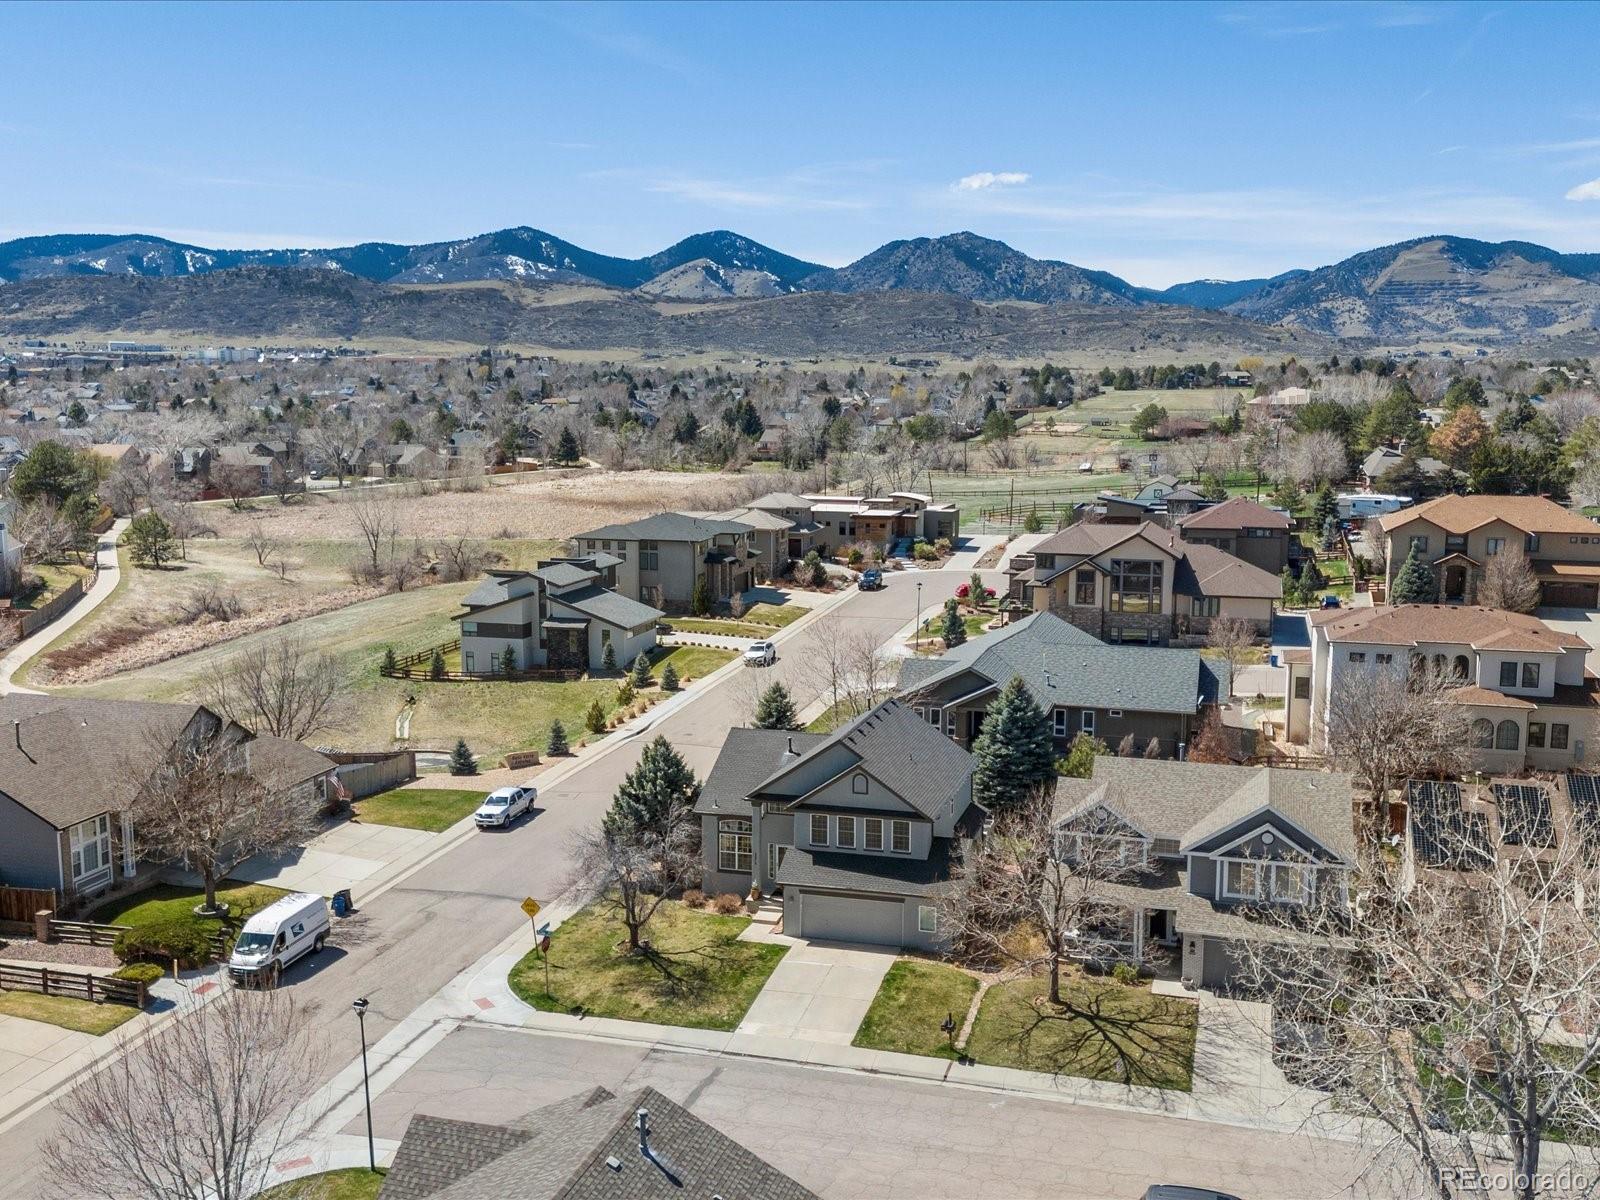 Report Image for 5273 S Tabor Way,Littleton, Colorado